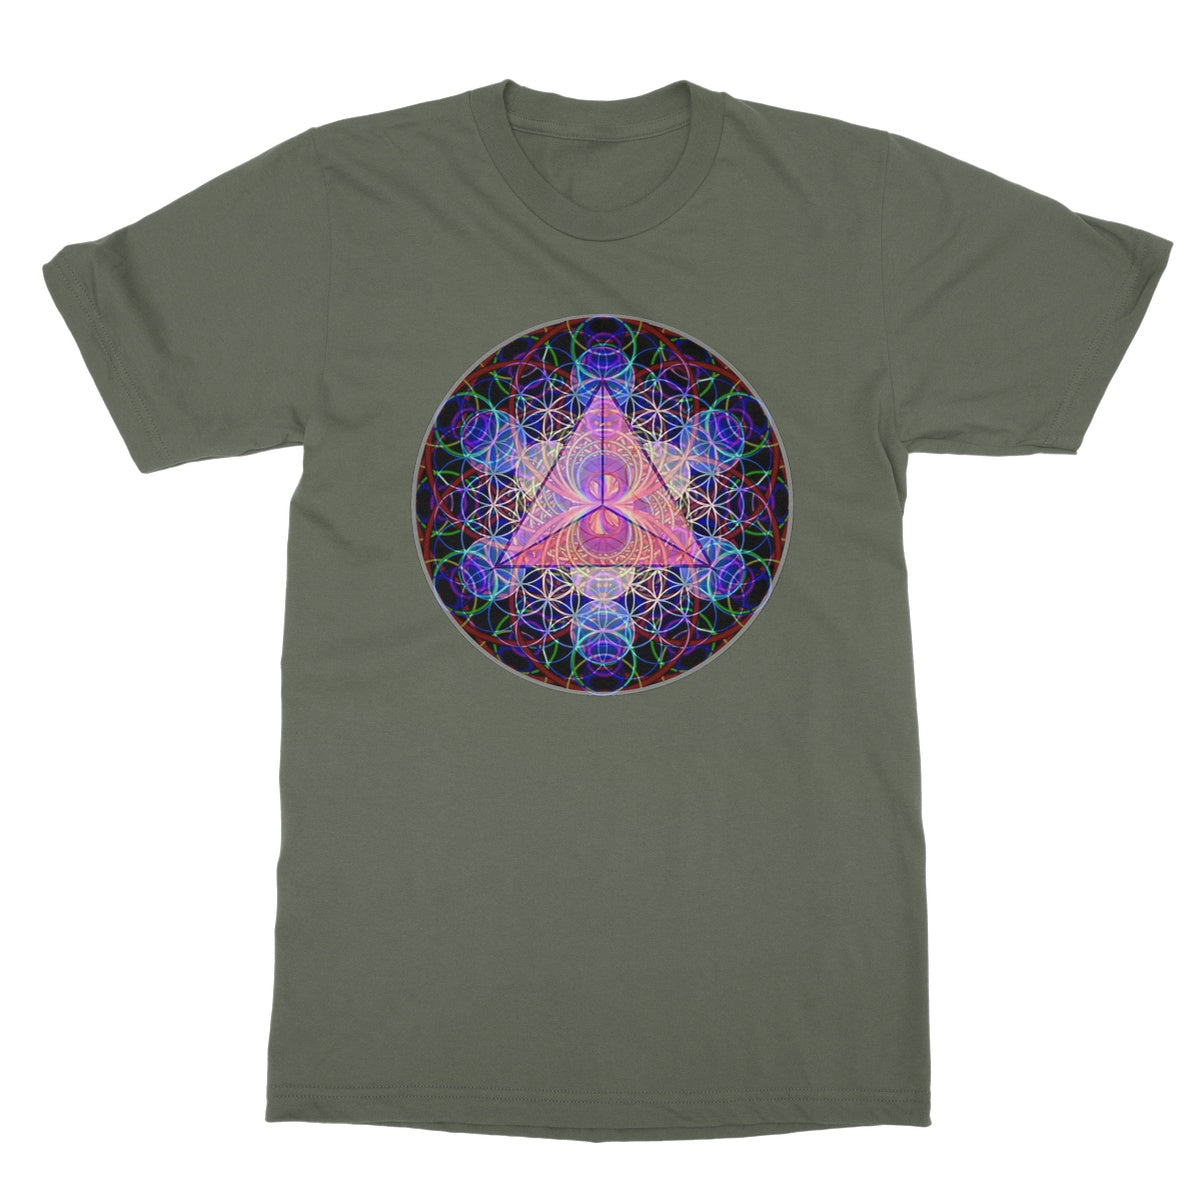 The Platonic Solid Tetrahedron Softstyle T-Shirt